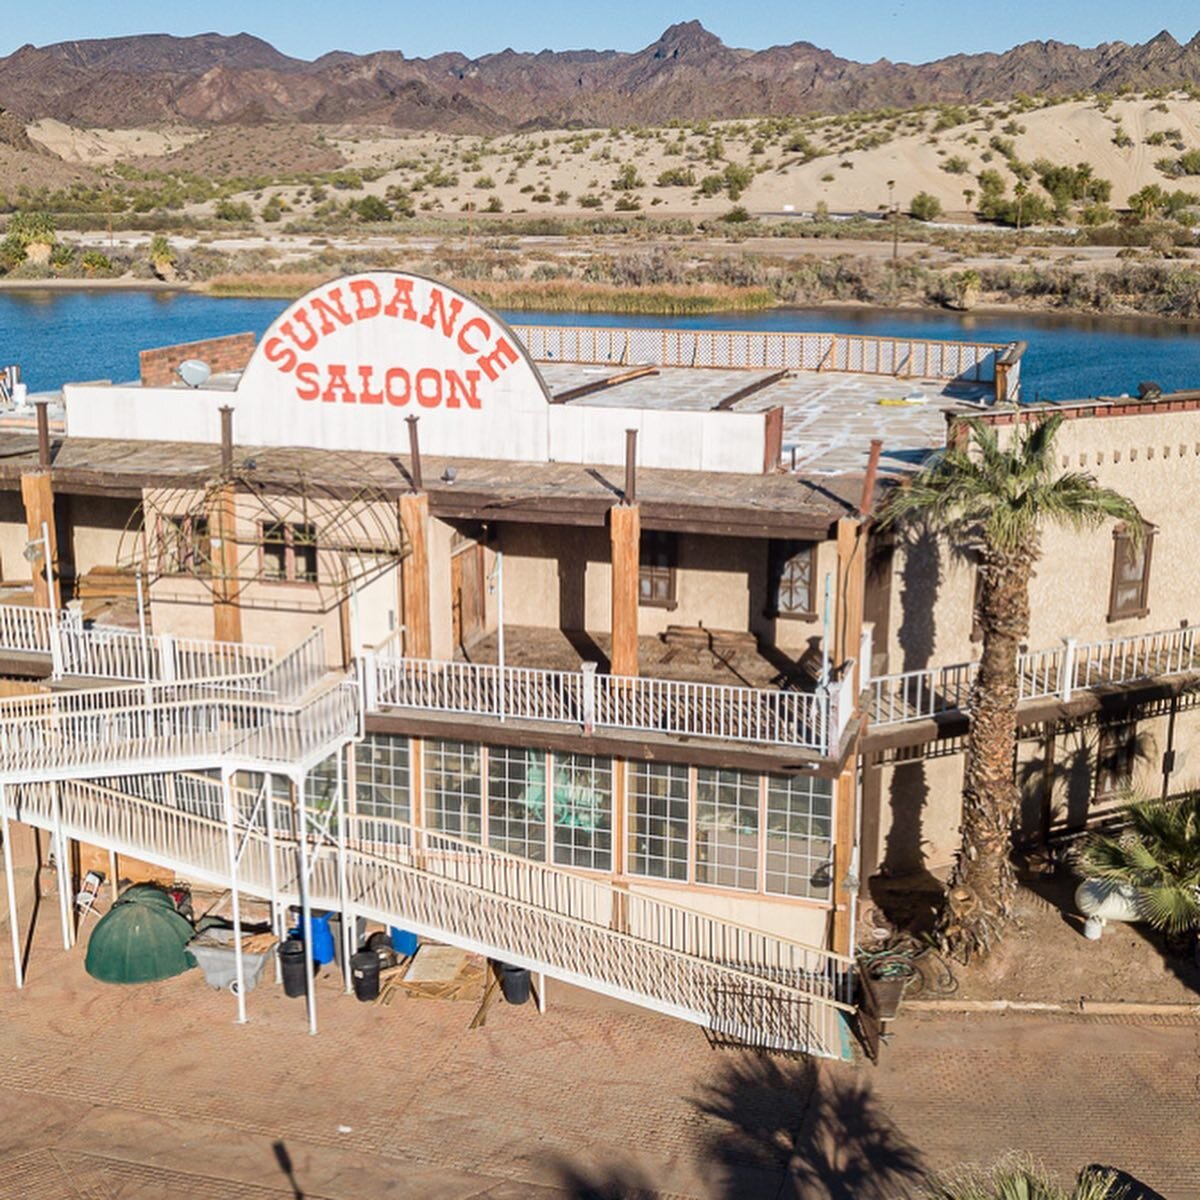 Did a cool photo shoot and floorplan a few days ago: historic music/party venue right on the Colorado River and just below Parker Dam. It&rsquo;s seen better days but could be restored to full glory. Great location. Largest property I&rsquo;ve done..